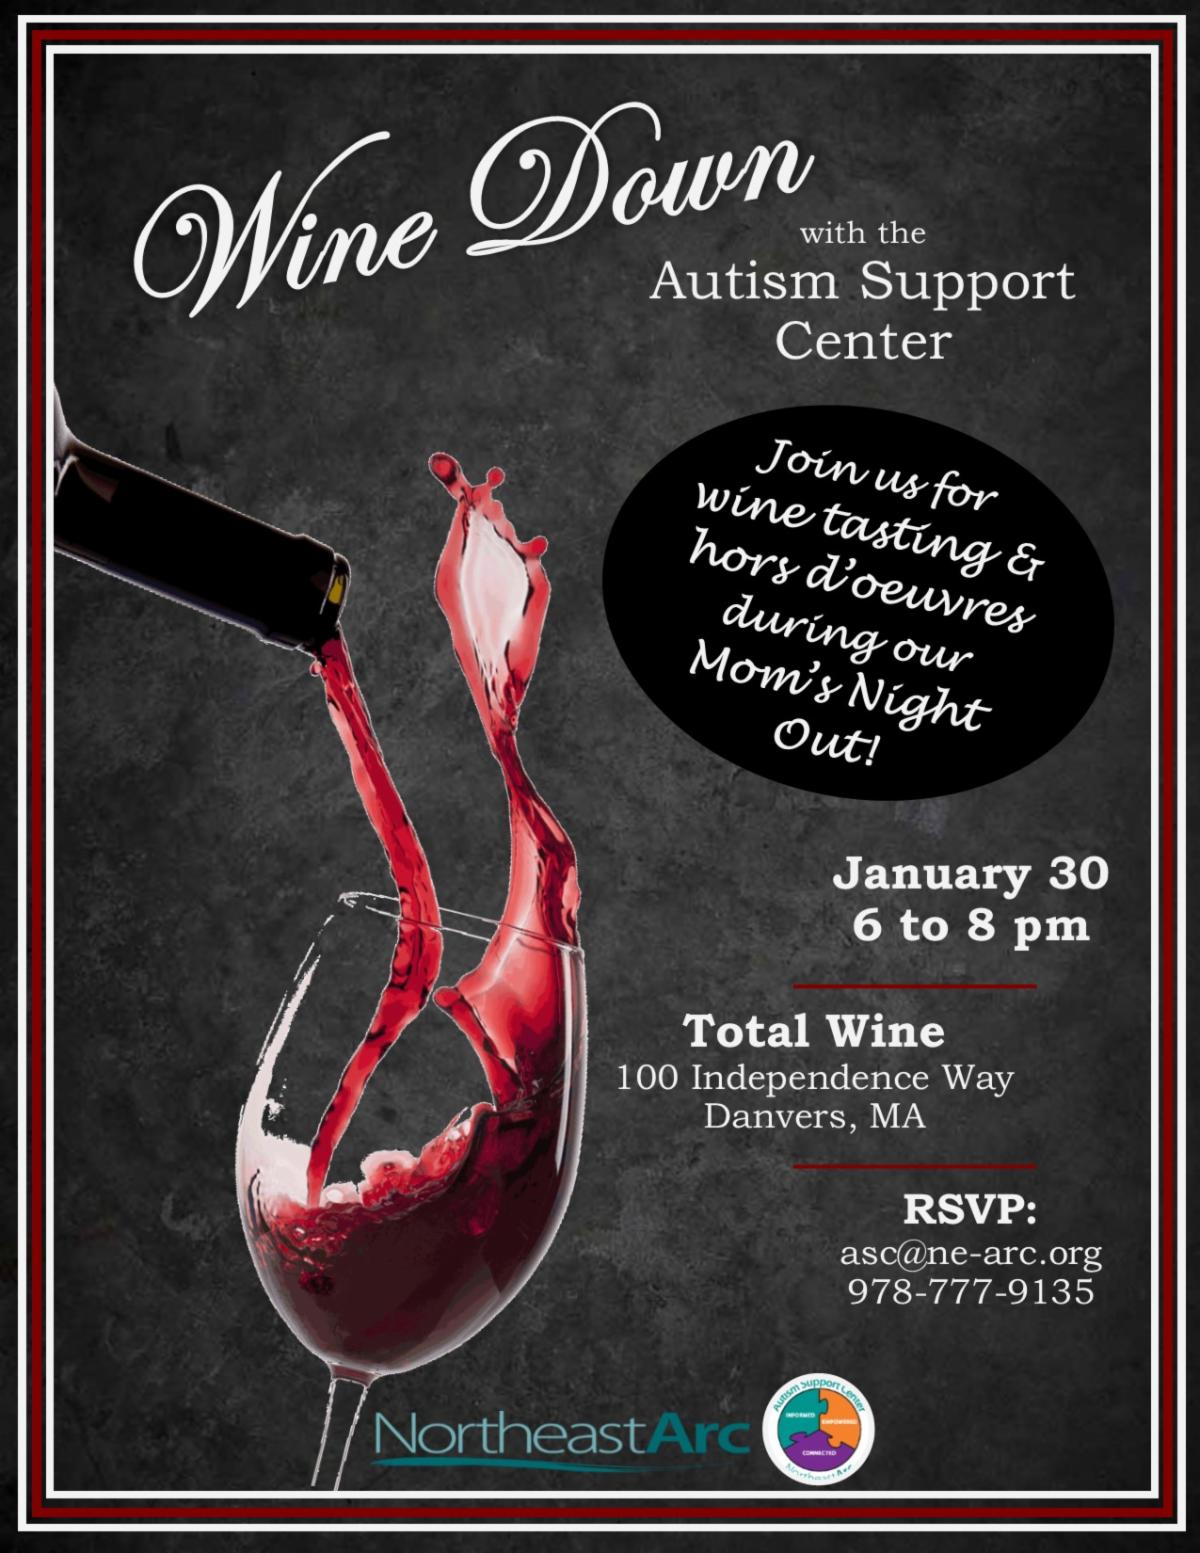 Flyer for Wine Down event